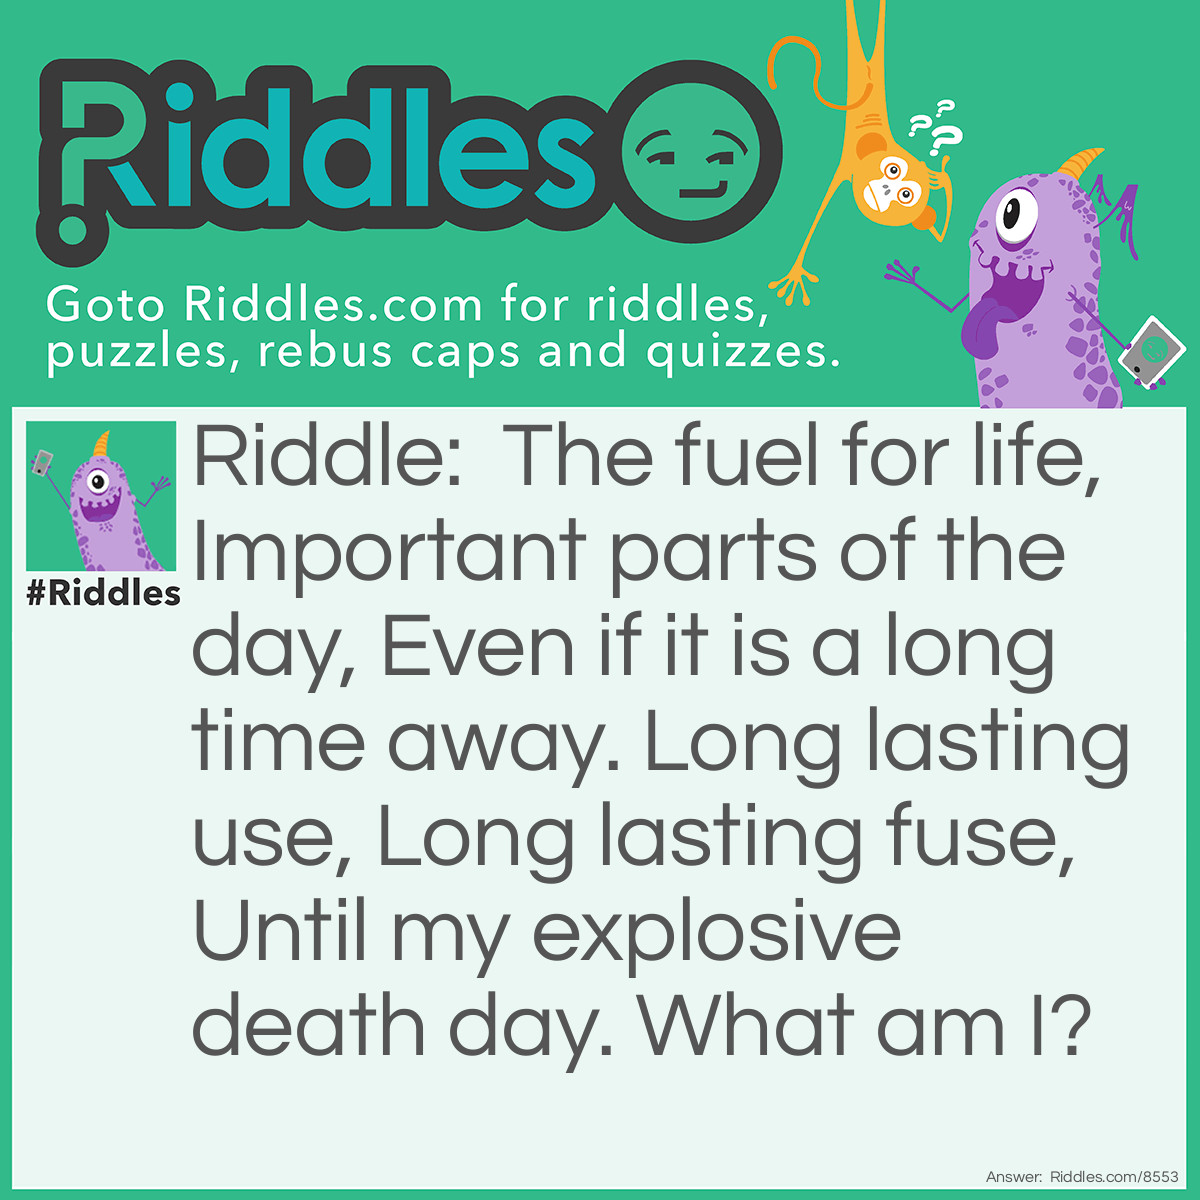 Riddle: The fuel for life, Important parts of the day, Even if it is a long time away. Long lasting use, Long lasting fuse, Until my explosive death day. What am I? Answer: The sun.